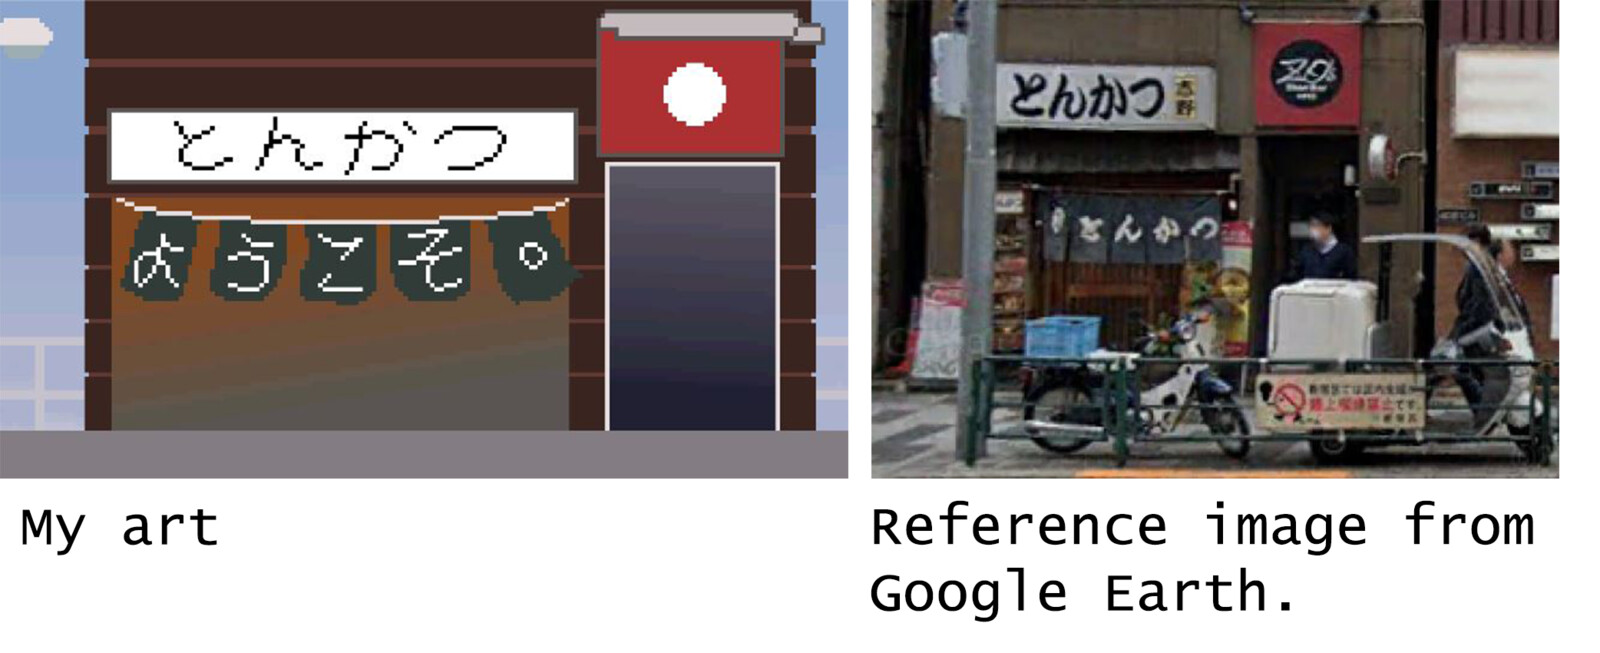 An example of how I gathered real reference images from Google Earth and then made pixelated versions based on the real buildings. The sign reads 'Tonkatsu' meaning Japanese Pork Cutlet, signifying that this building is a restaurant. 